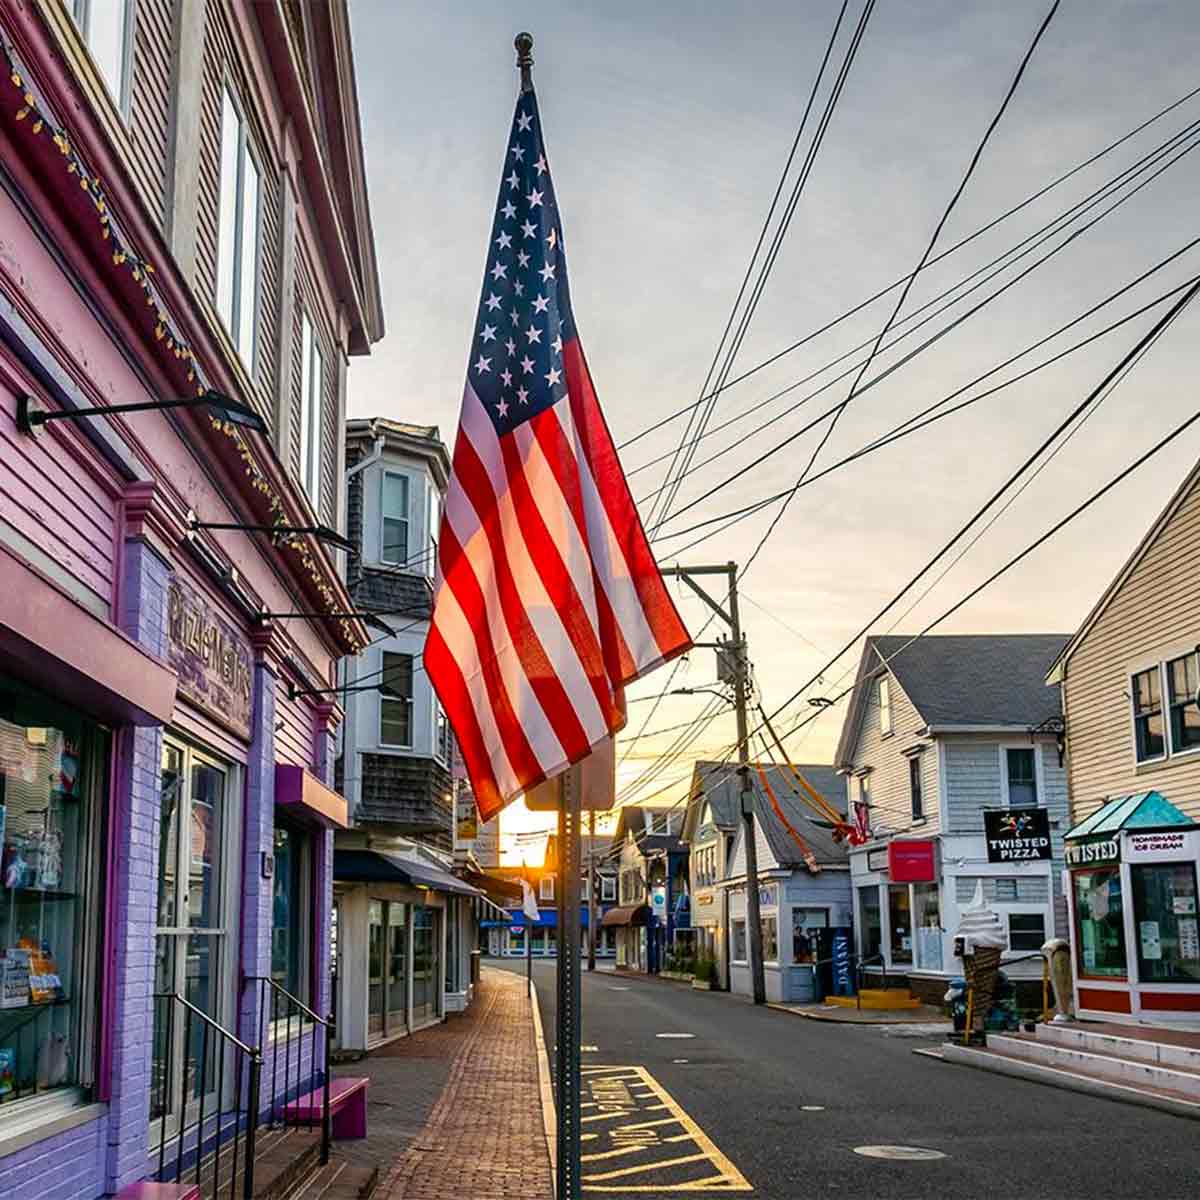 Street in Provincetown early in the morning before July 4th weekend.